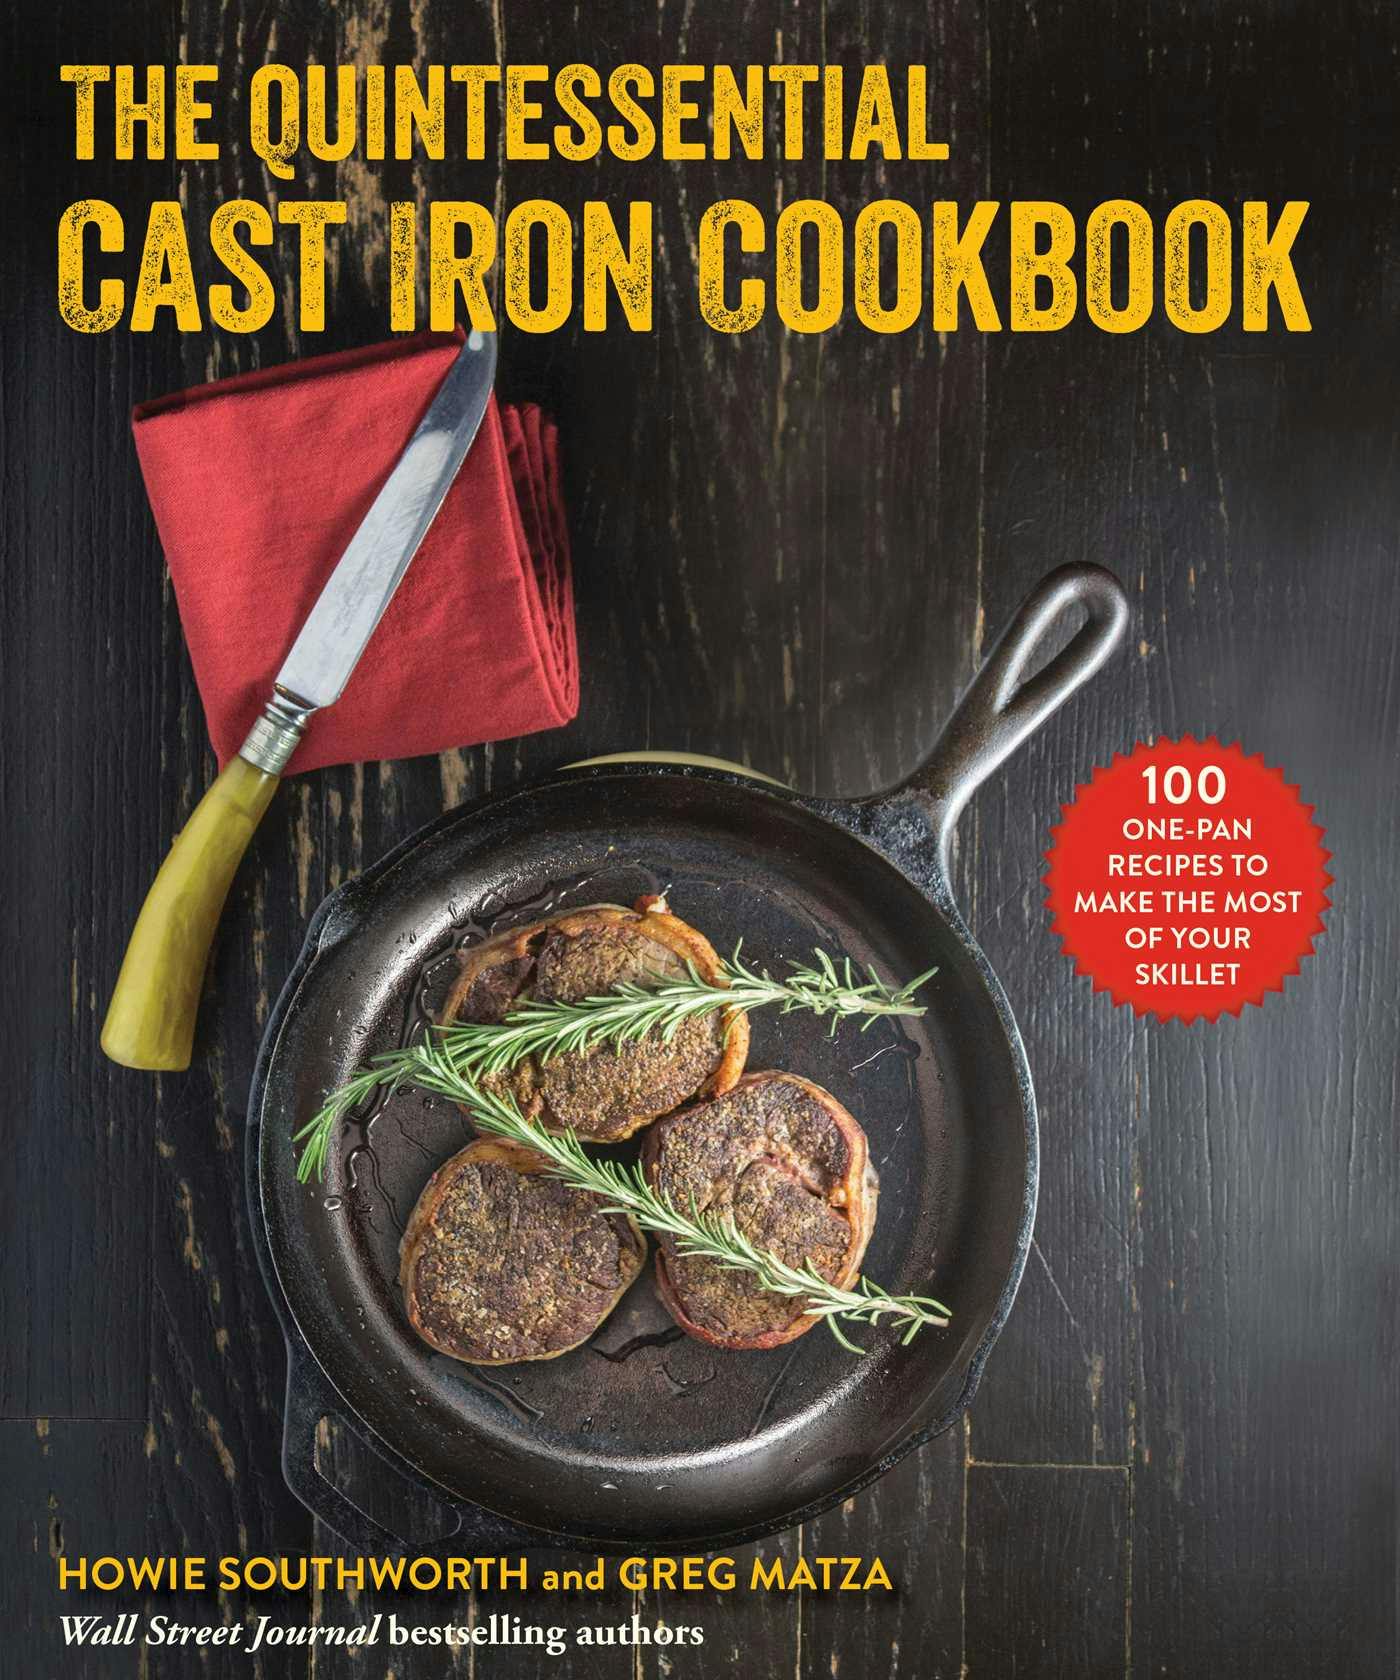 The Quintessential Cast Iron Cookbook: 100 One-Pan Recipes to Make the Most of Your Skillet - Greg Matza, Howie Southworth